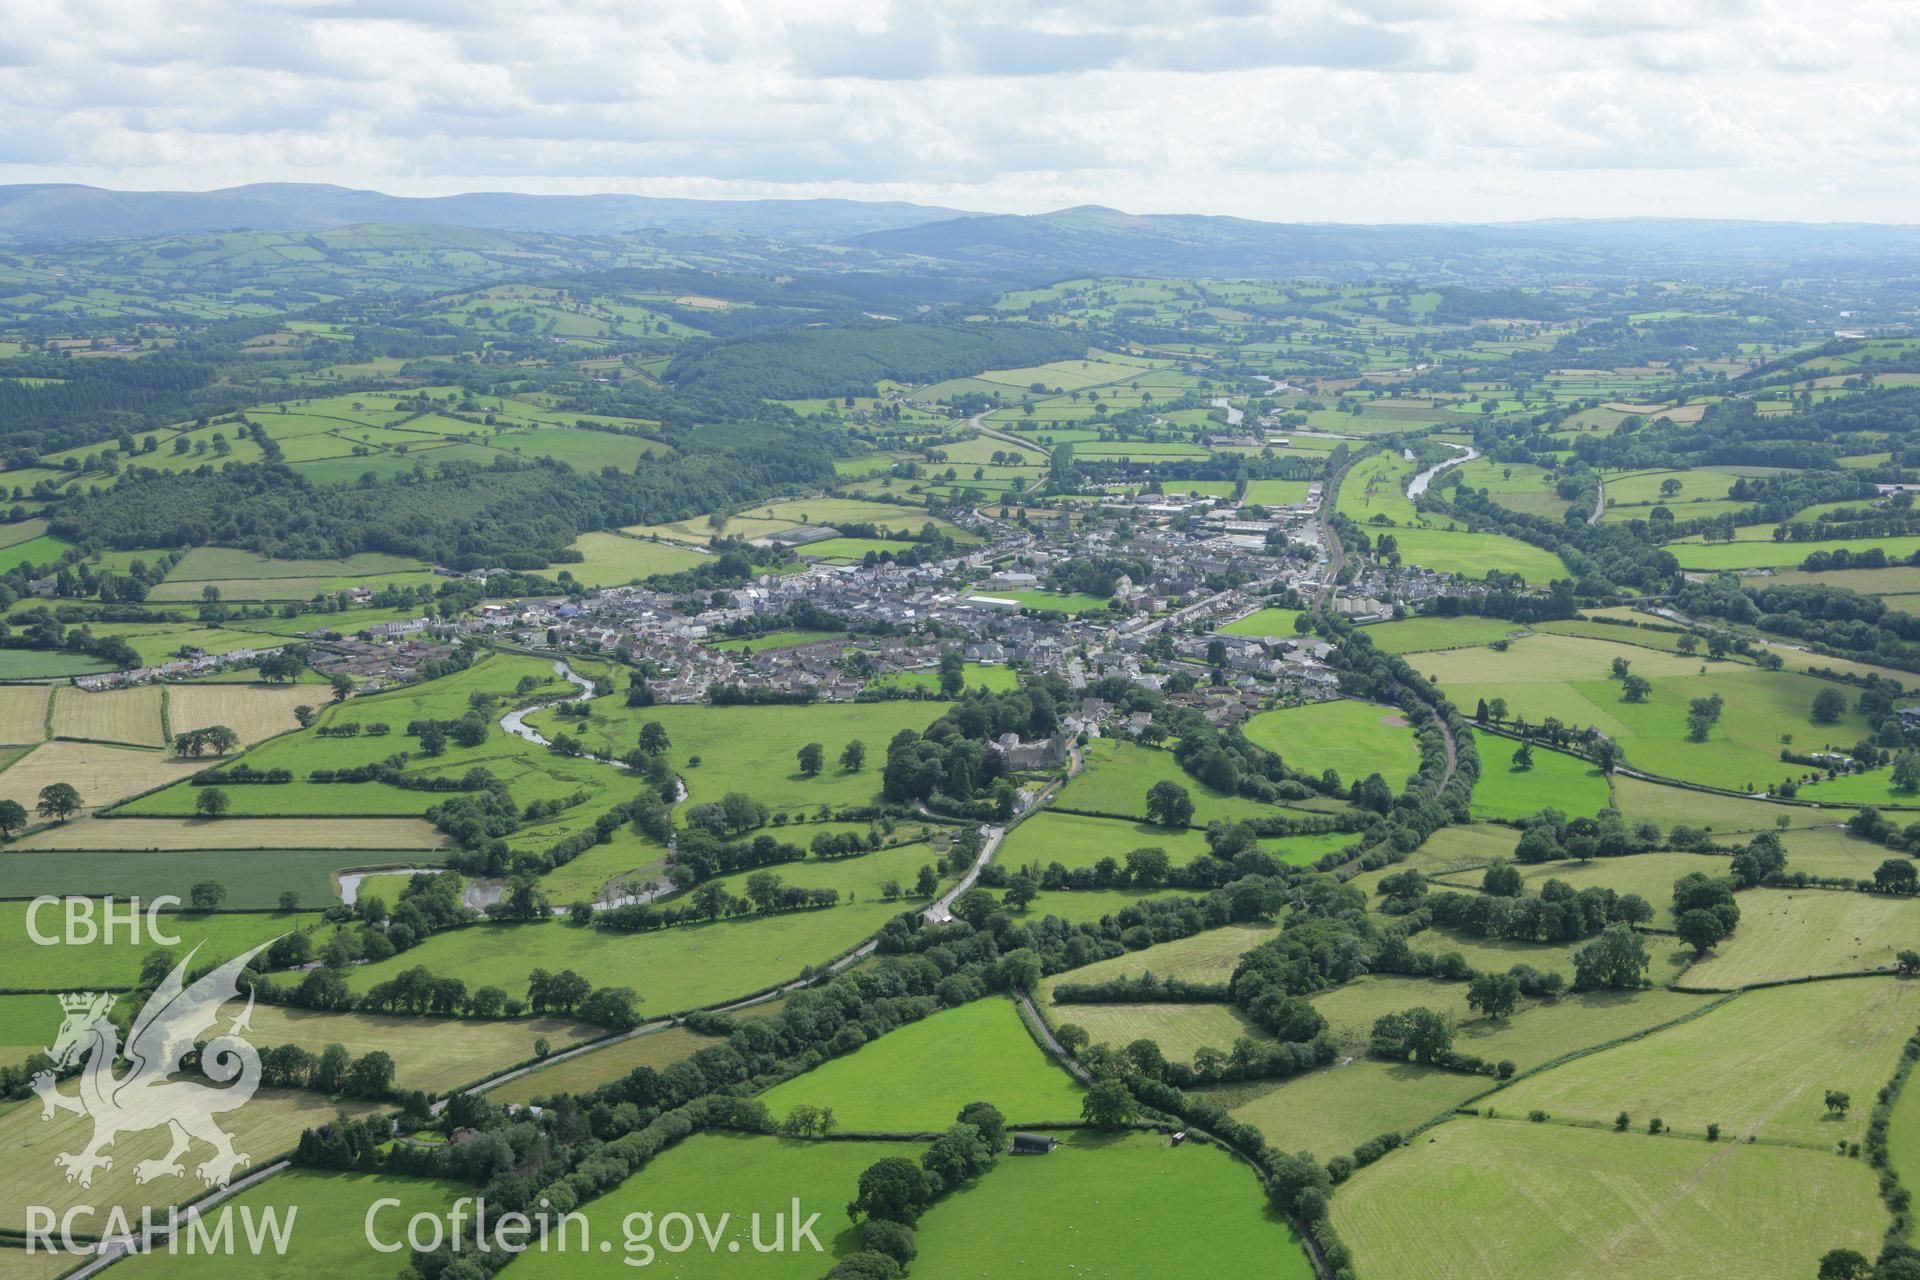 RCAHMW colour oblique aerial photograph of Llandovery viewed from the north-east. Taken on 09 July 2007 by Toby Driver